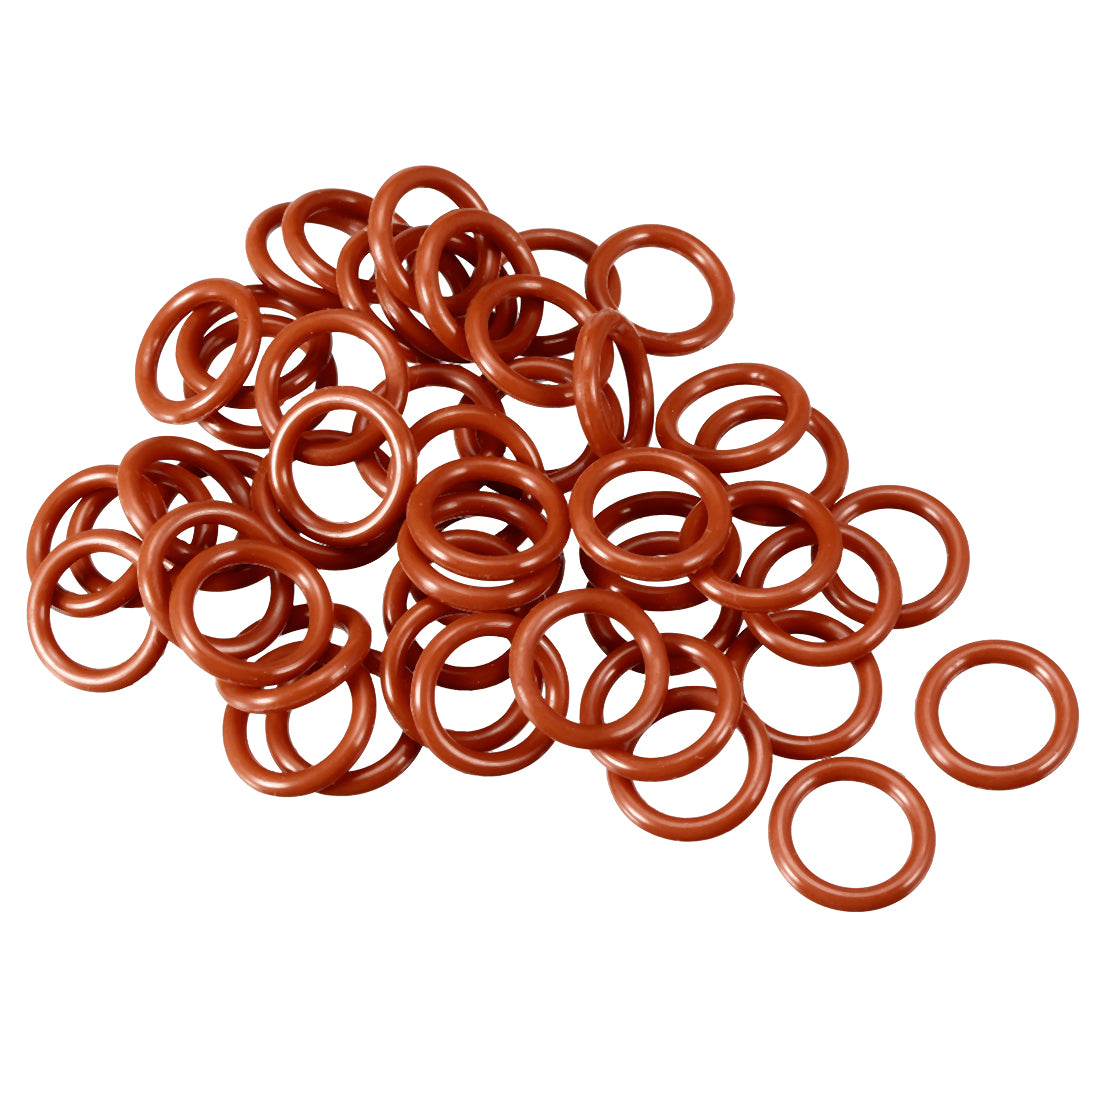 uxcell Uxcell Silicone O-Ring VMQ Seal Rings Sealing Gasket Red 50PCS